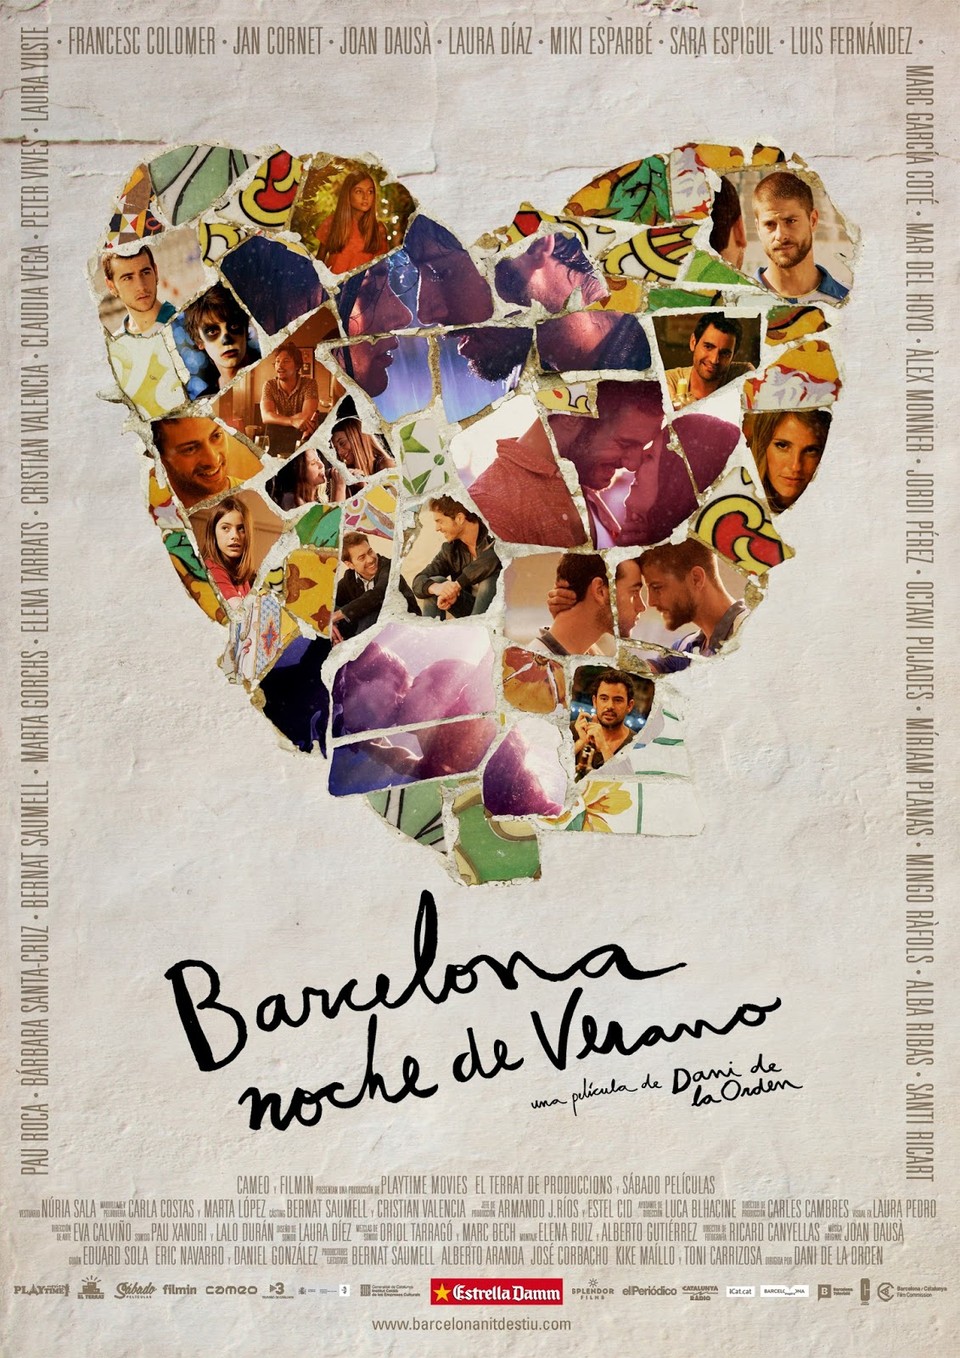 Extra Large Movie Poster Image for Barcelona, nit d'estiu (#1 of 4)